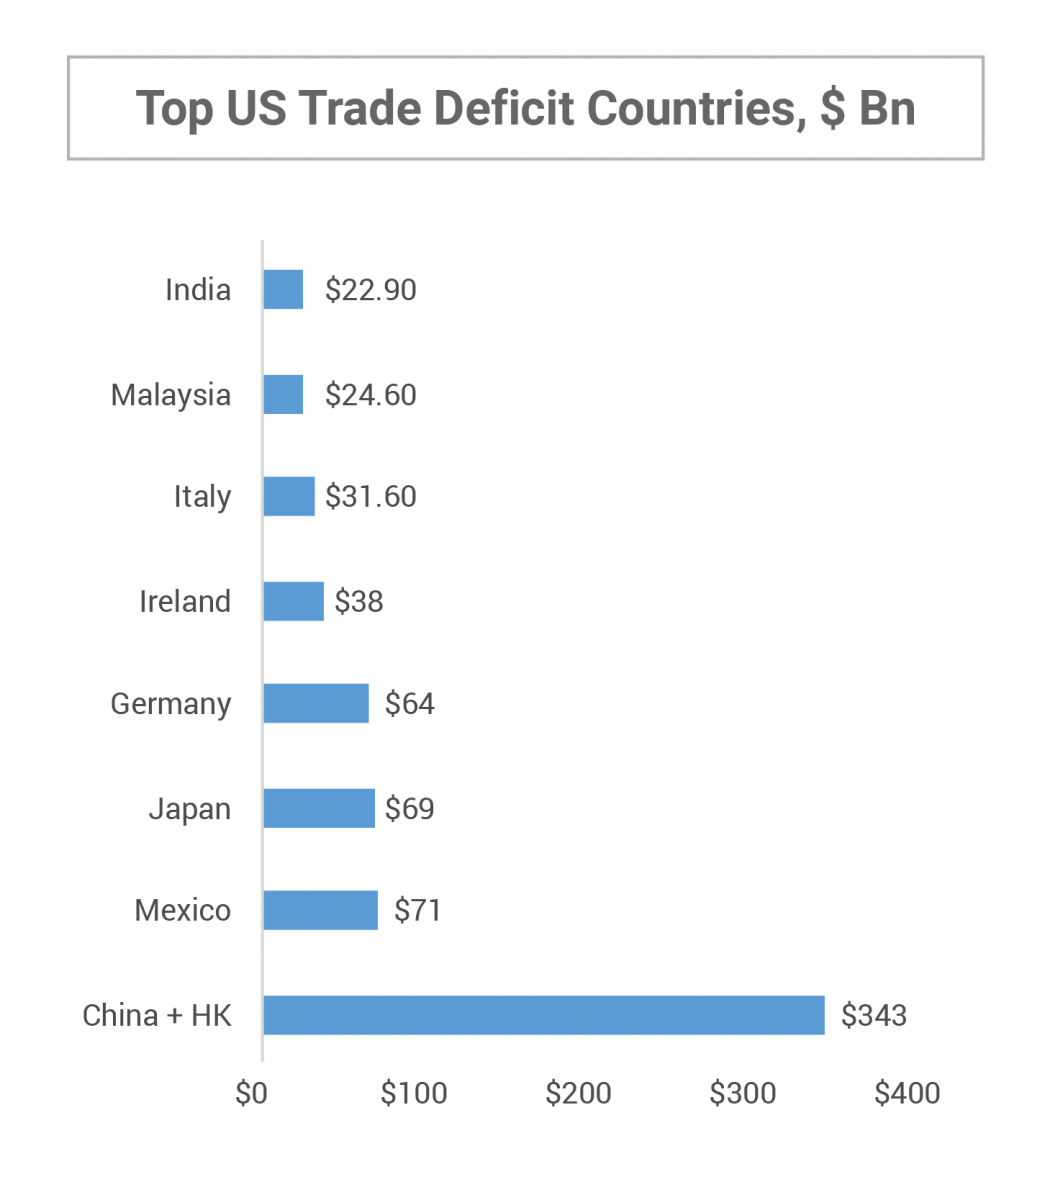 Top US Trade Deficit Countries, $ Bn